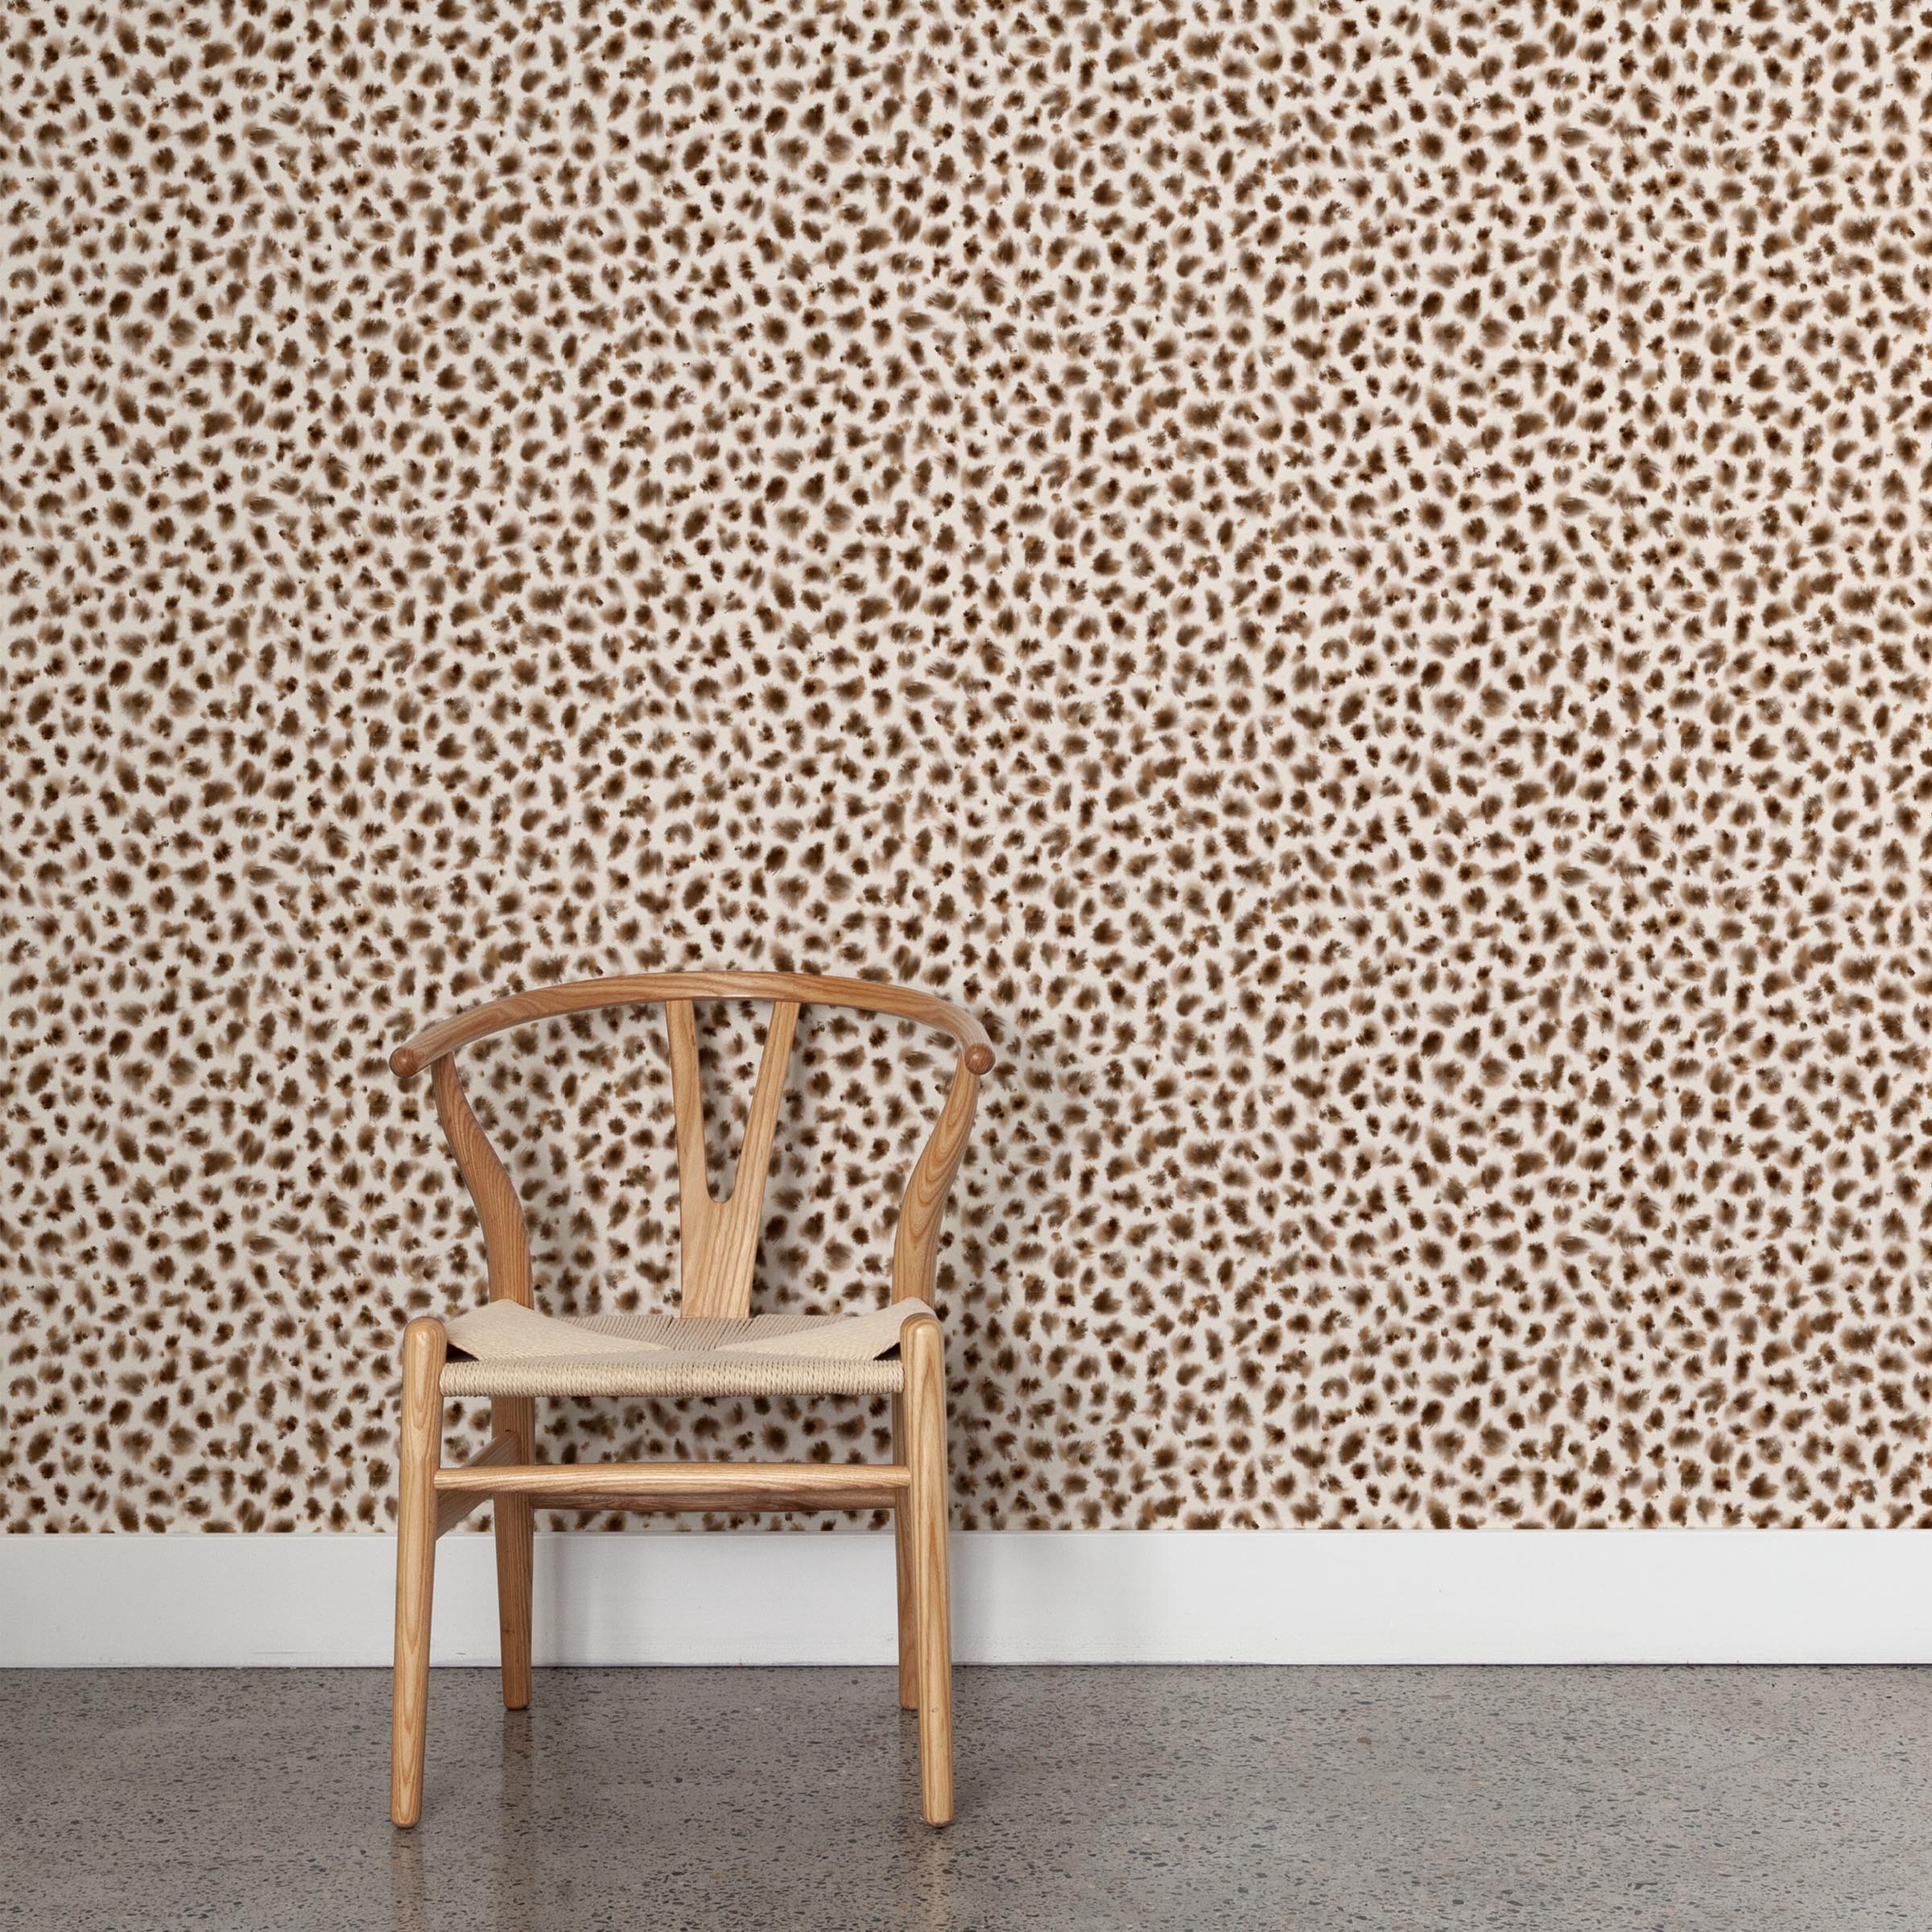 A wooden chair stands in front of a wall papered in a painterly animal print in shades of brown on a cream field.